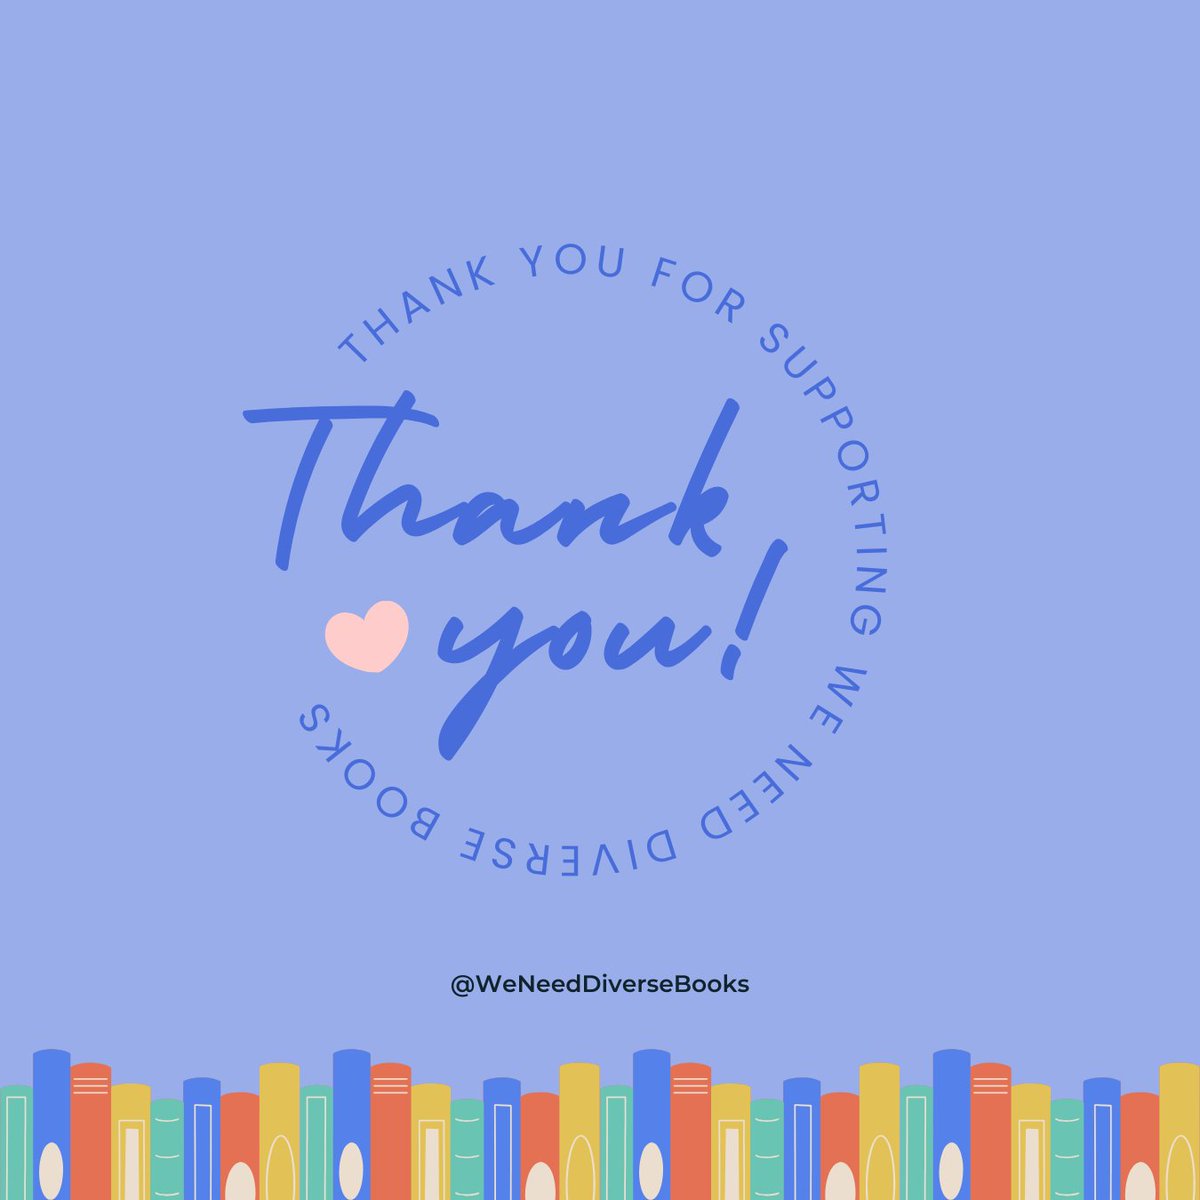 We're deeply grateful for all your continued support. It’s thanks to all of you who are part of the WNDB community that we can continue showing why diverse stories will always matter!

Thank you for sharing and supporting ❤️📚